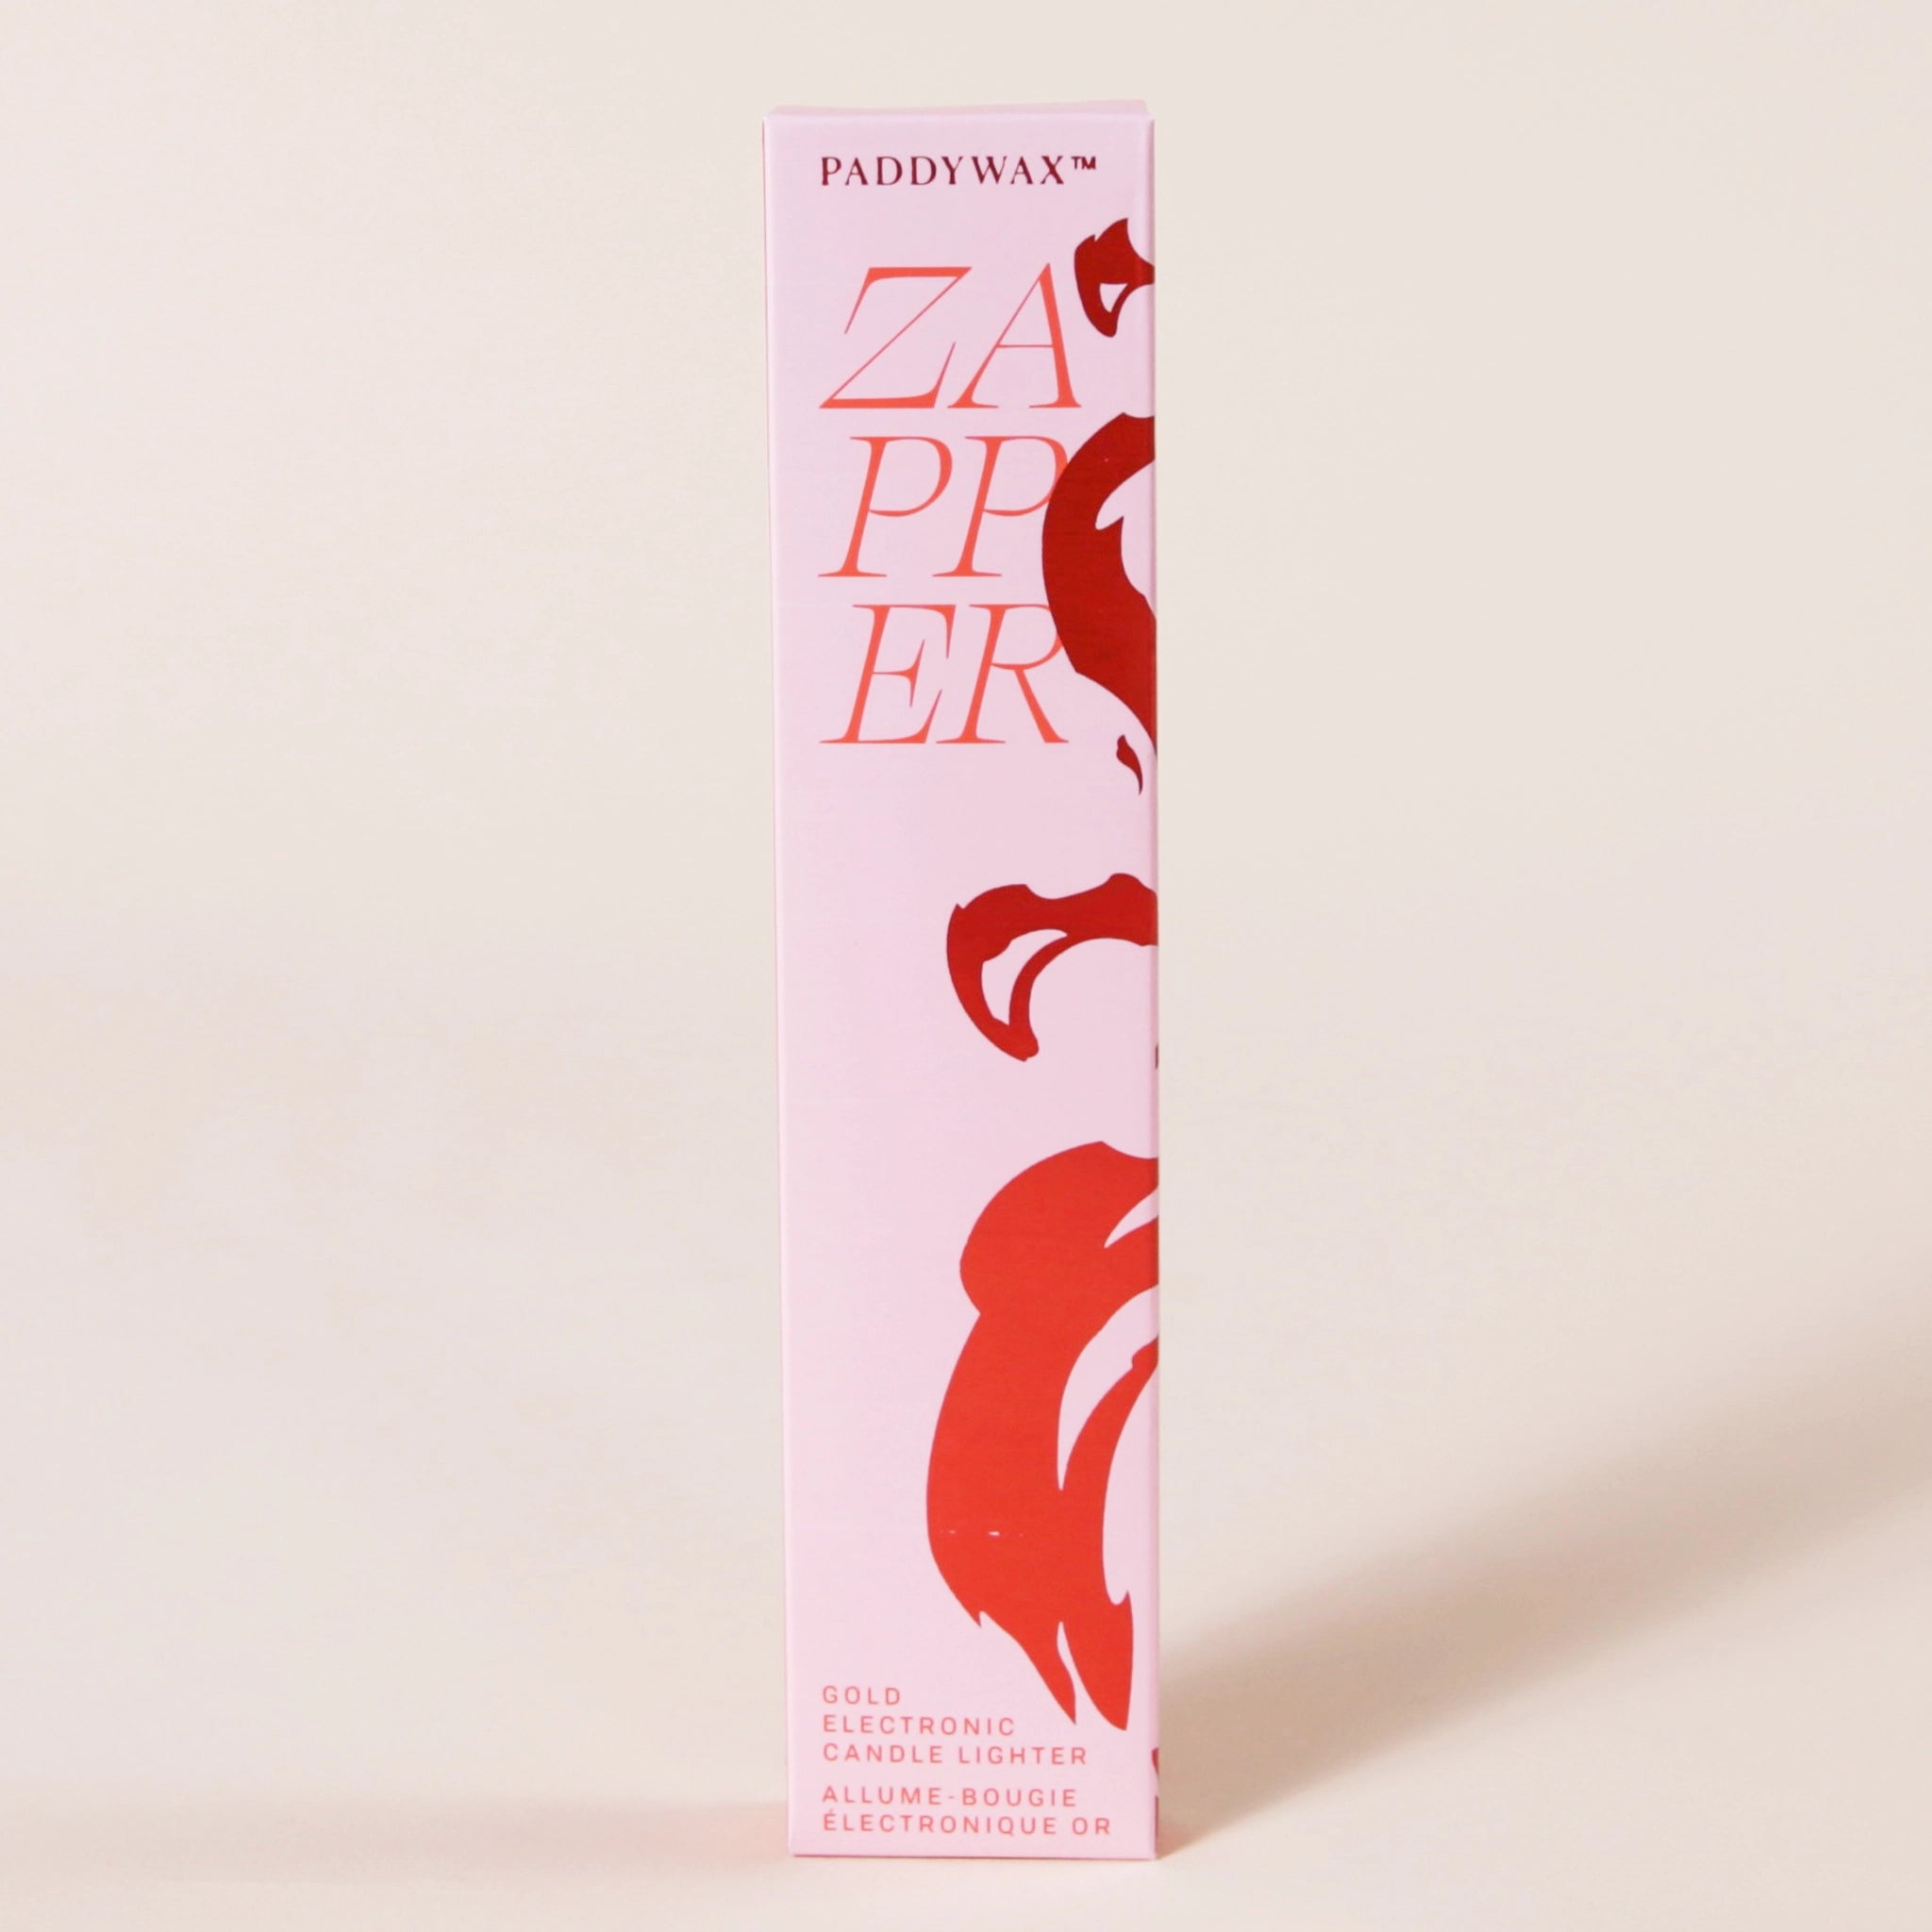 A pink box with a red wavy design and text that reads, "Paddywax Zapper Gold Electric Candle Lighter".